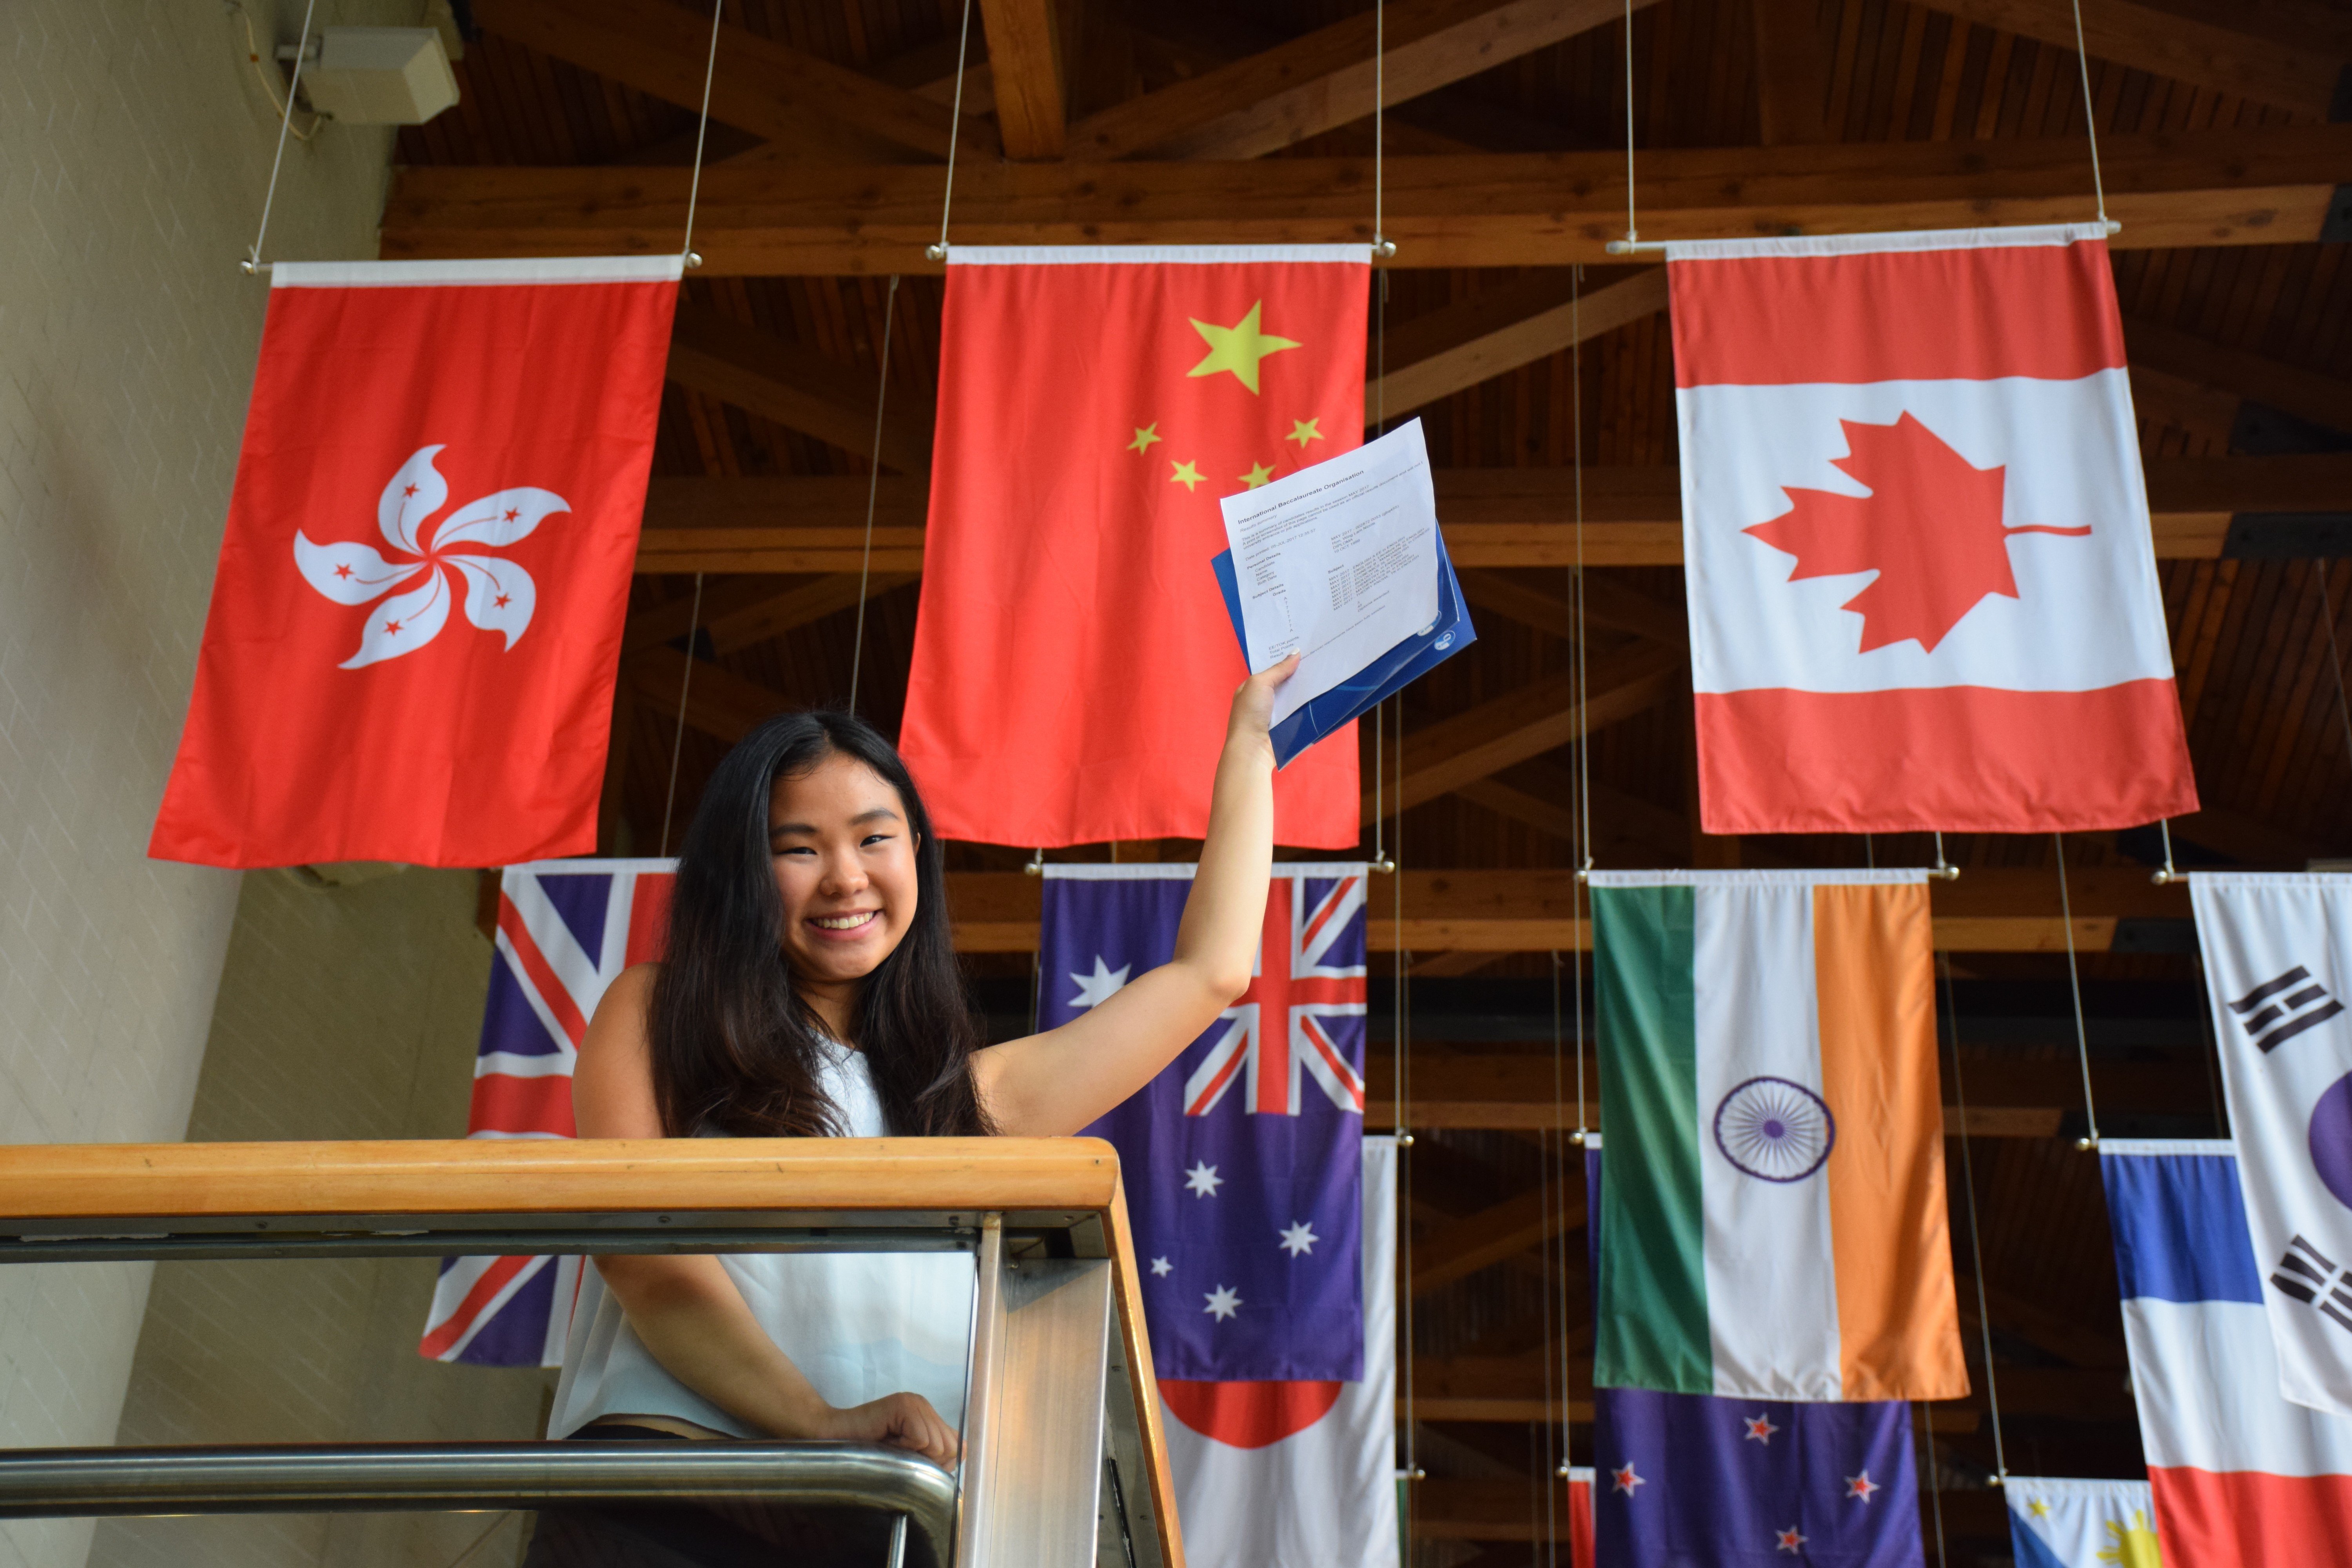 Nicole Hon from the Canadian International School of Hong kong achieved top scores and she is considering studying medicine at the University of Hong Kong or the University of Tornoto in Canada. Photo: CDNIS